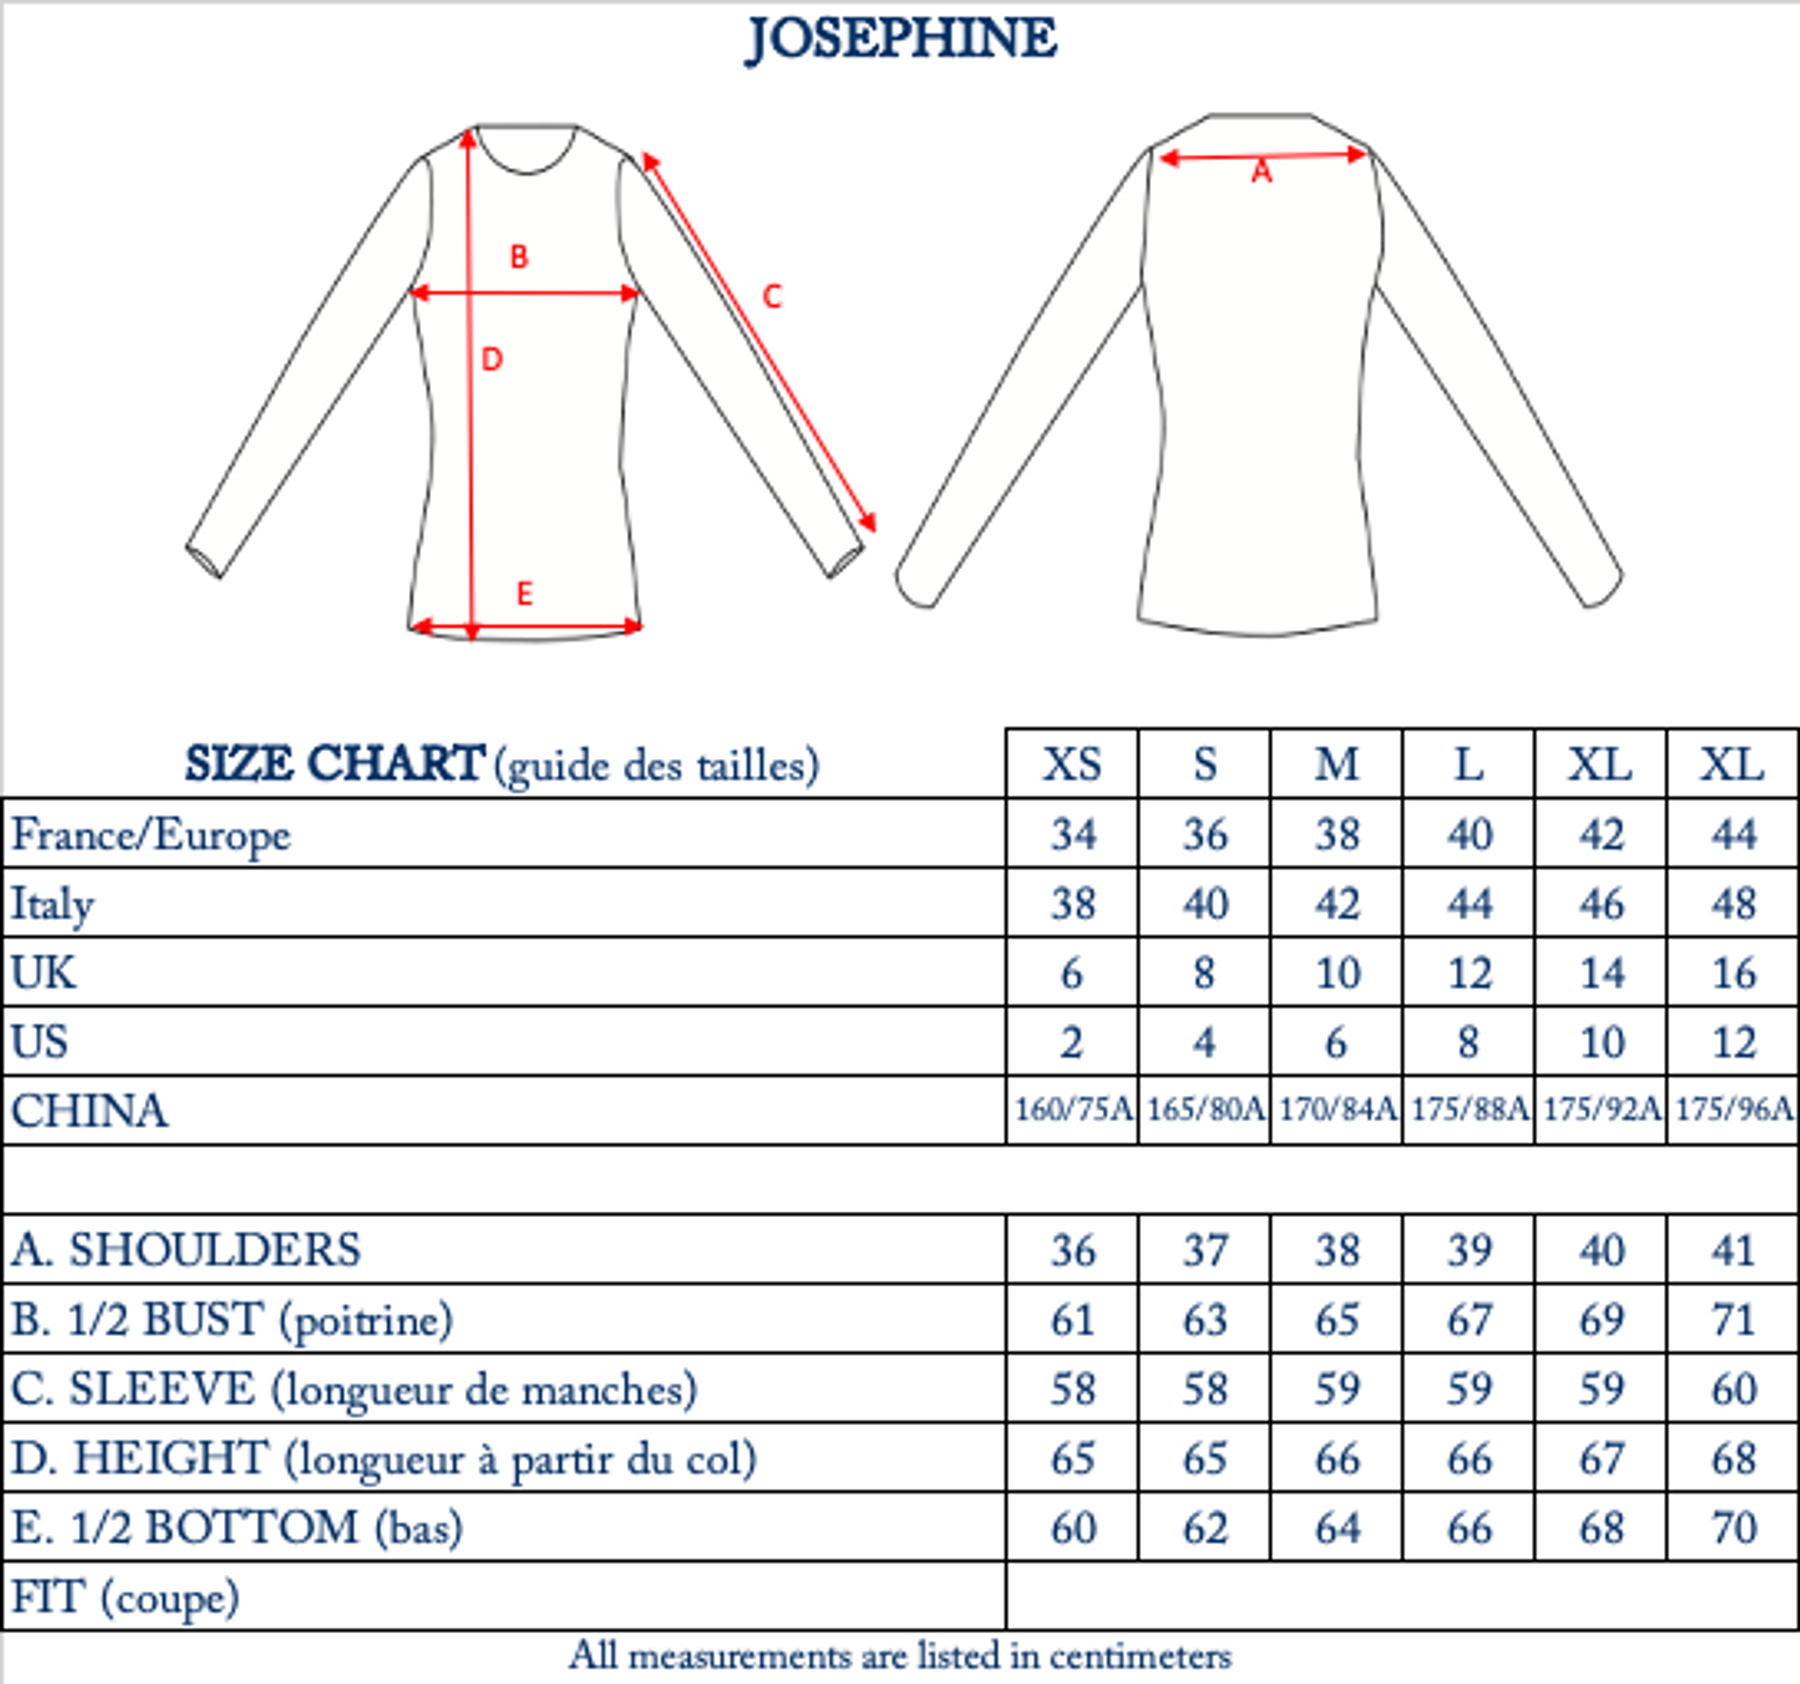 blouse-josephine-red-fountain